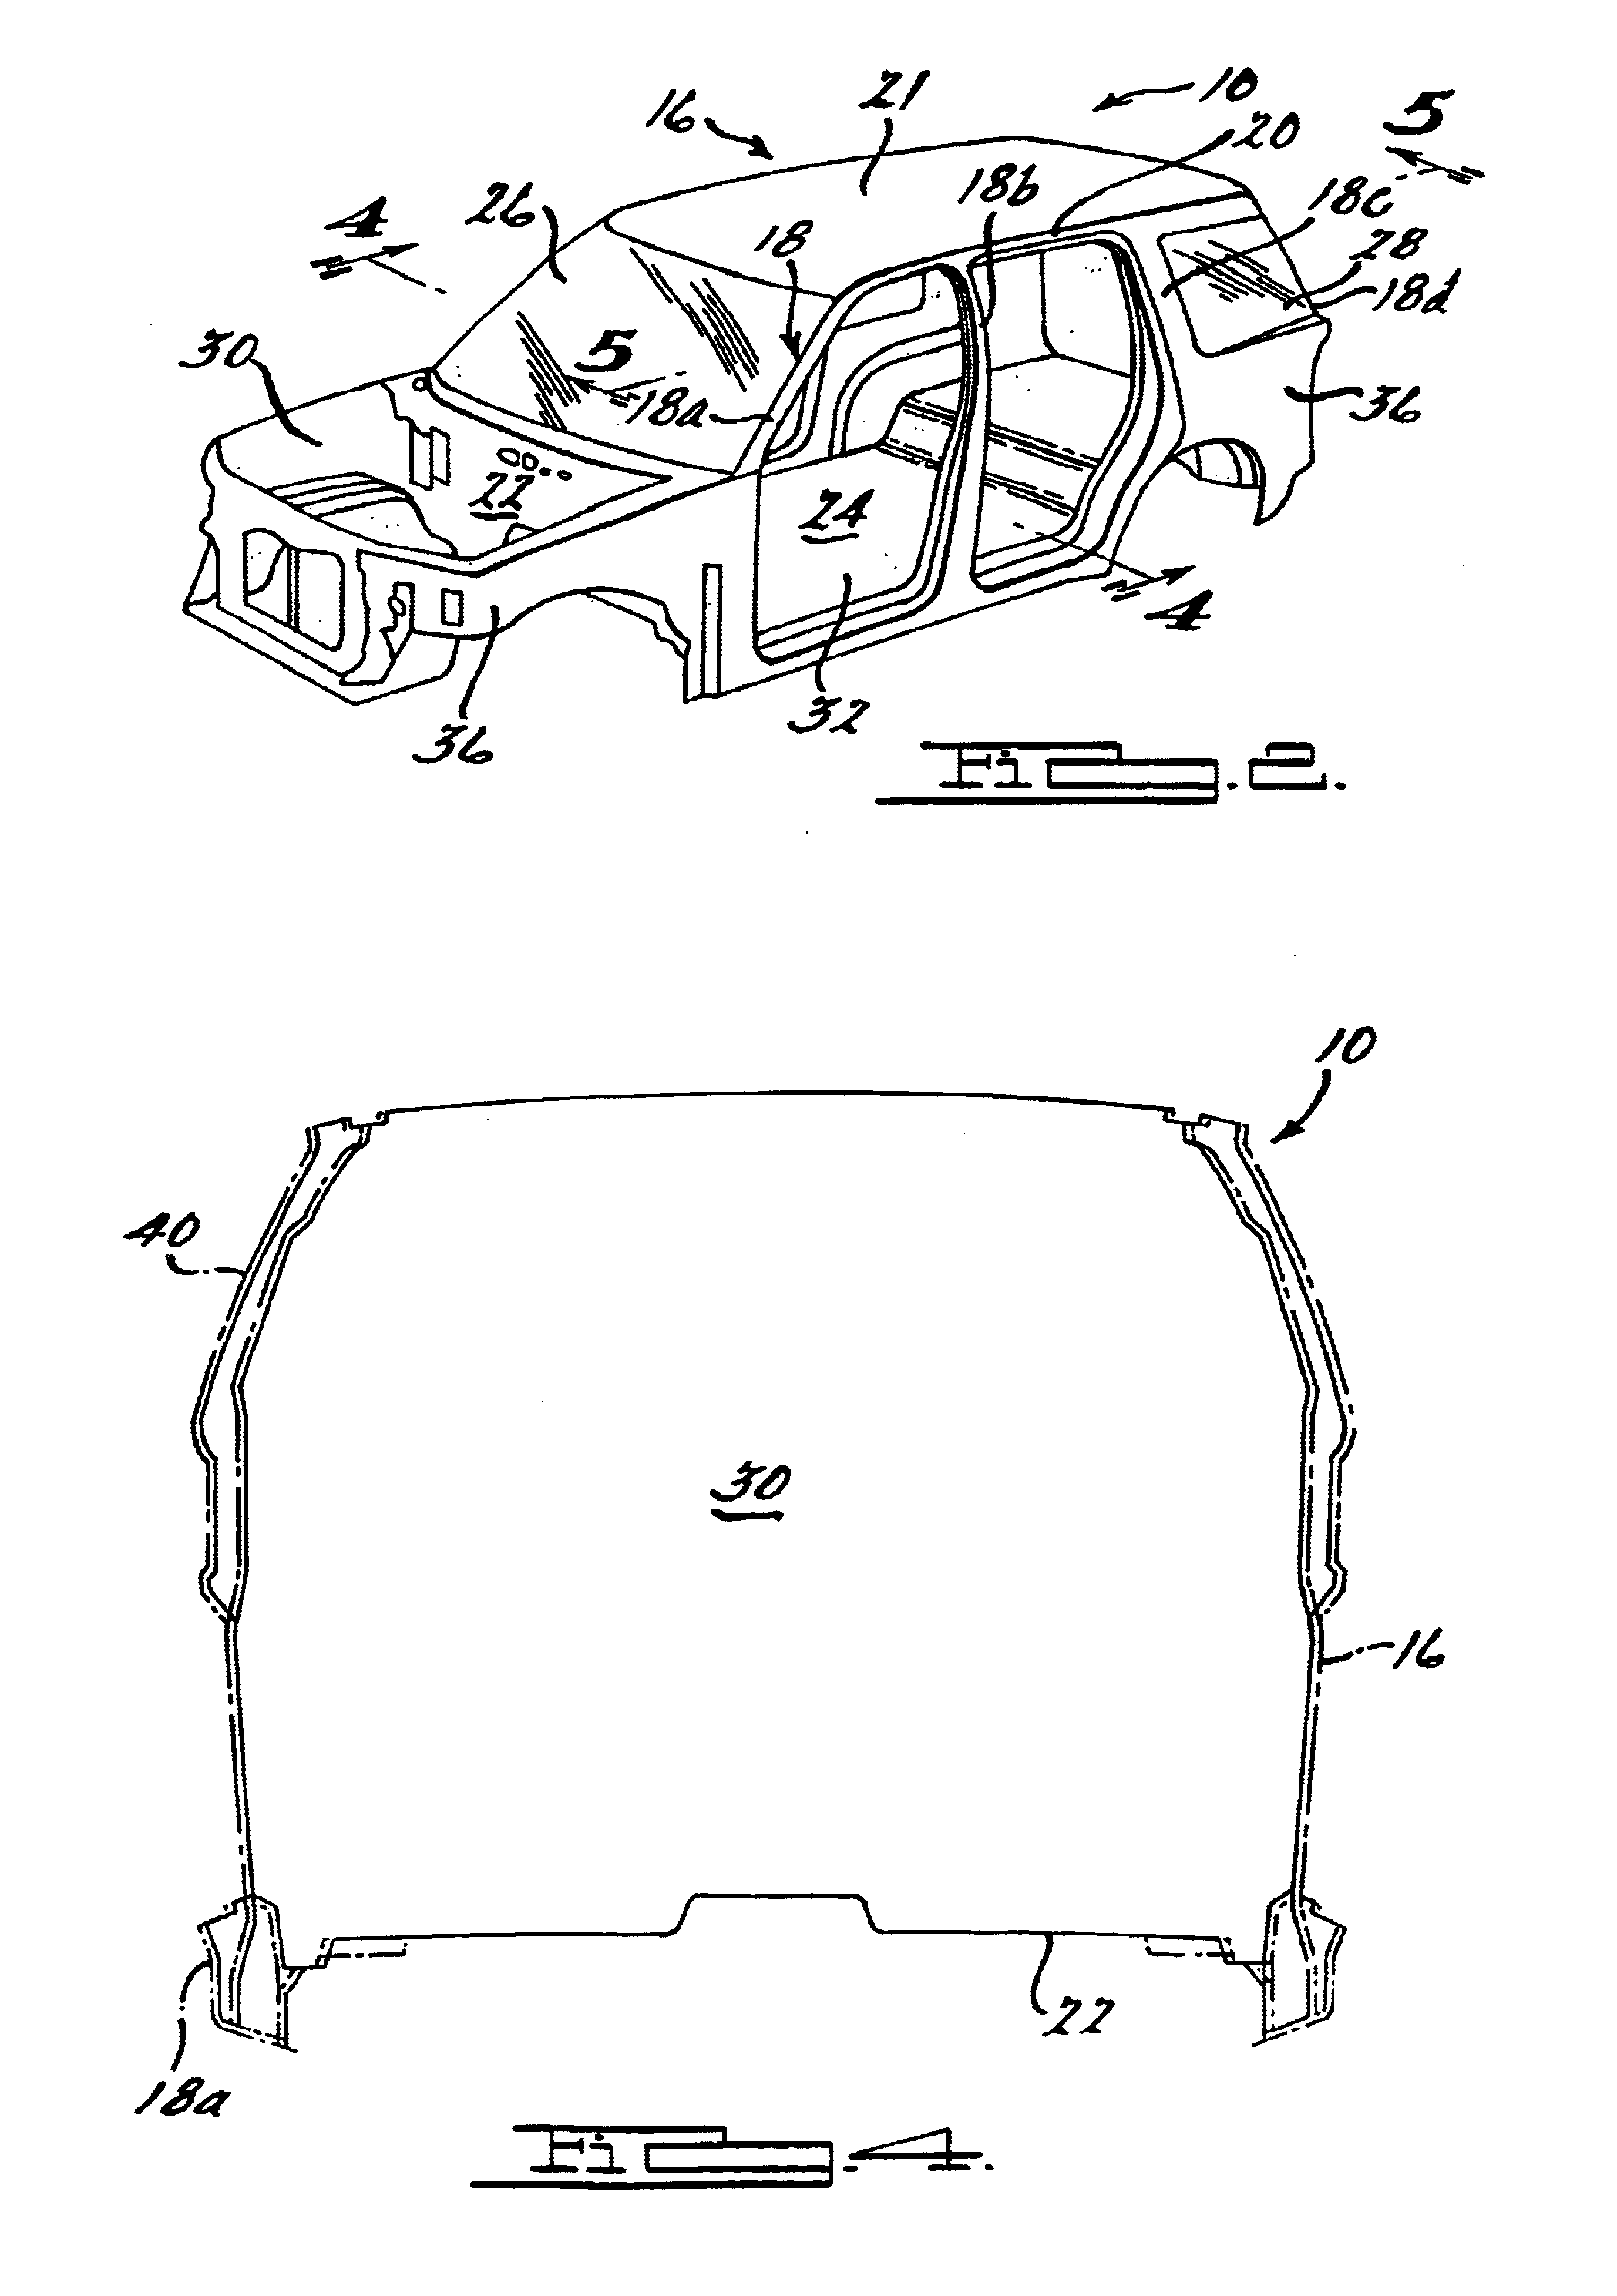 Method of integrating computer visualization for the design of a vehicle